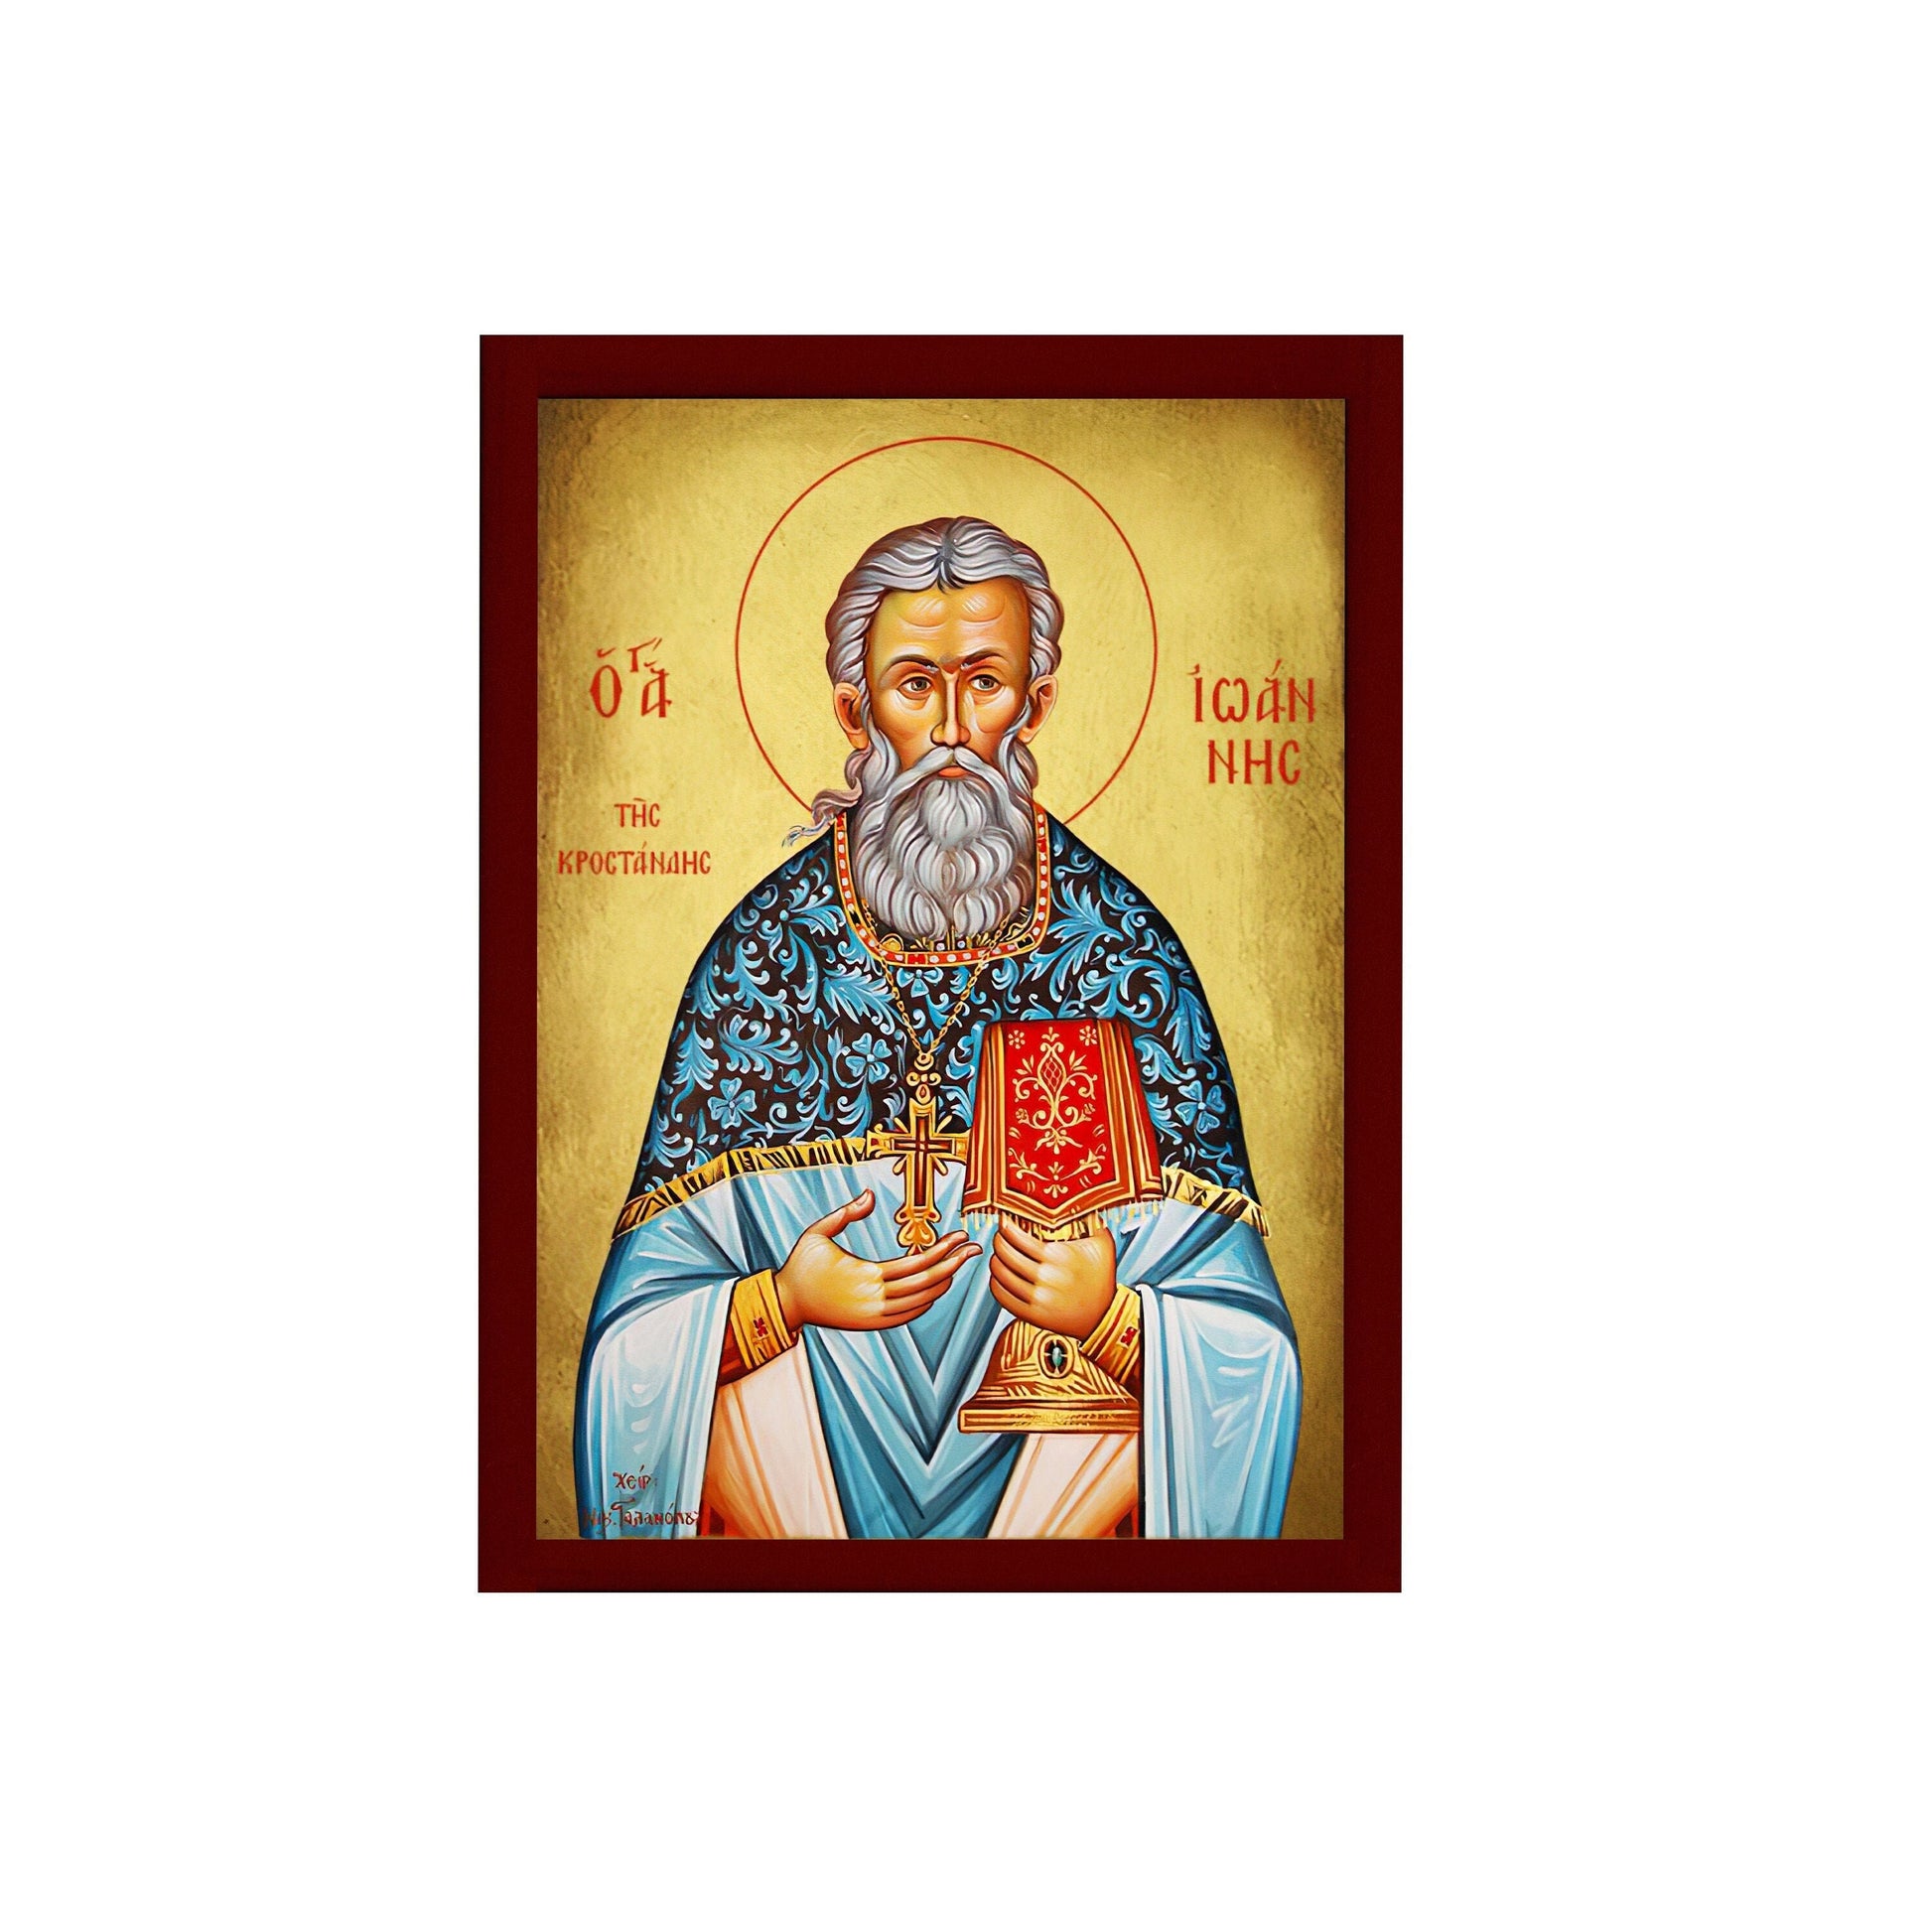 Saint John of Kronstadt icon, Handmade Christian Orthodox icon of St John the Righteous, Religious art wall hanging on wood plaque gift TheHolyArt